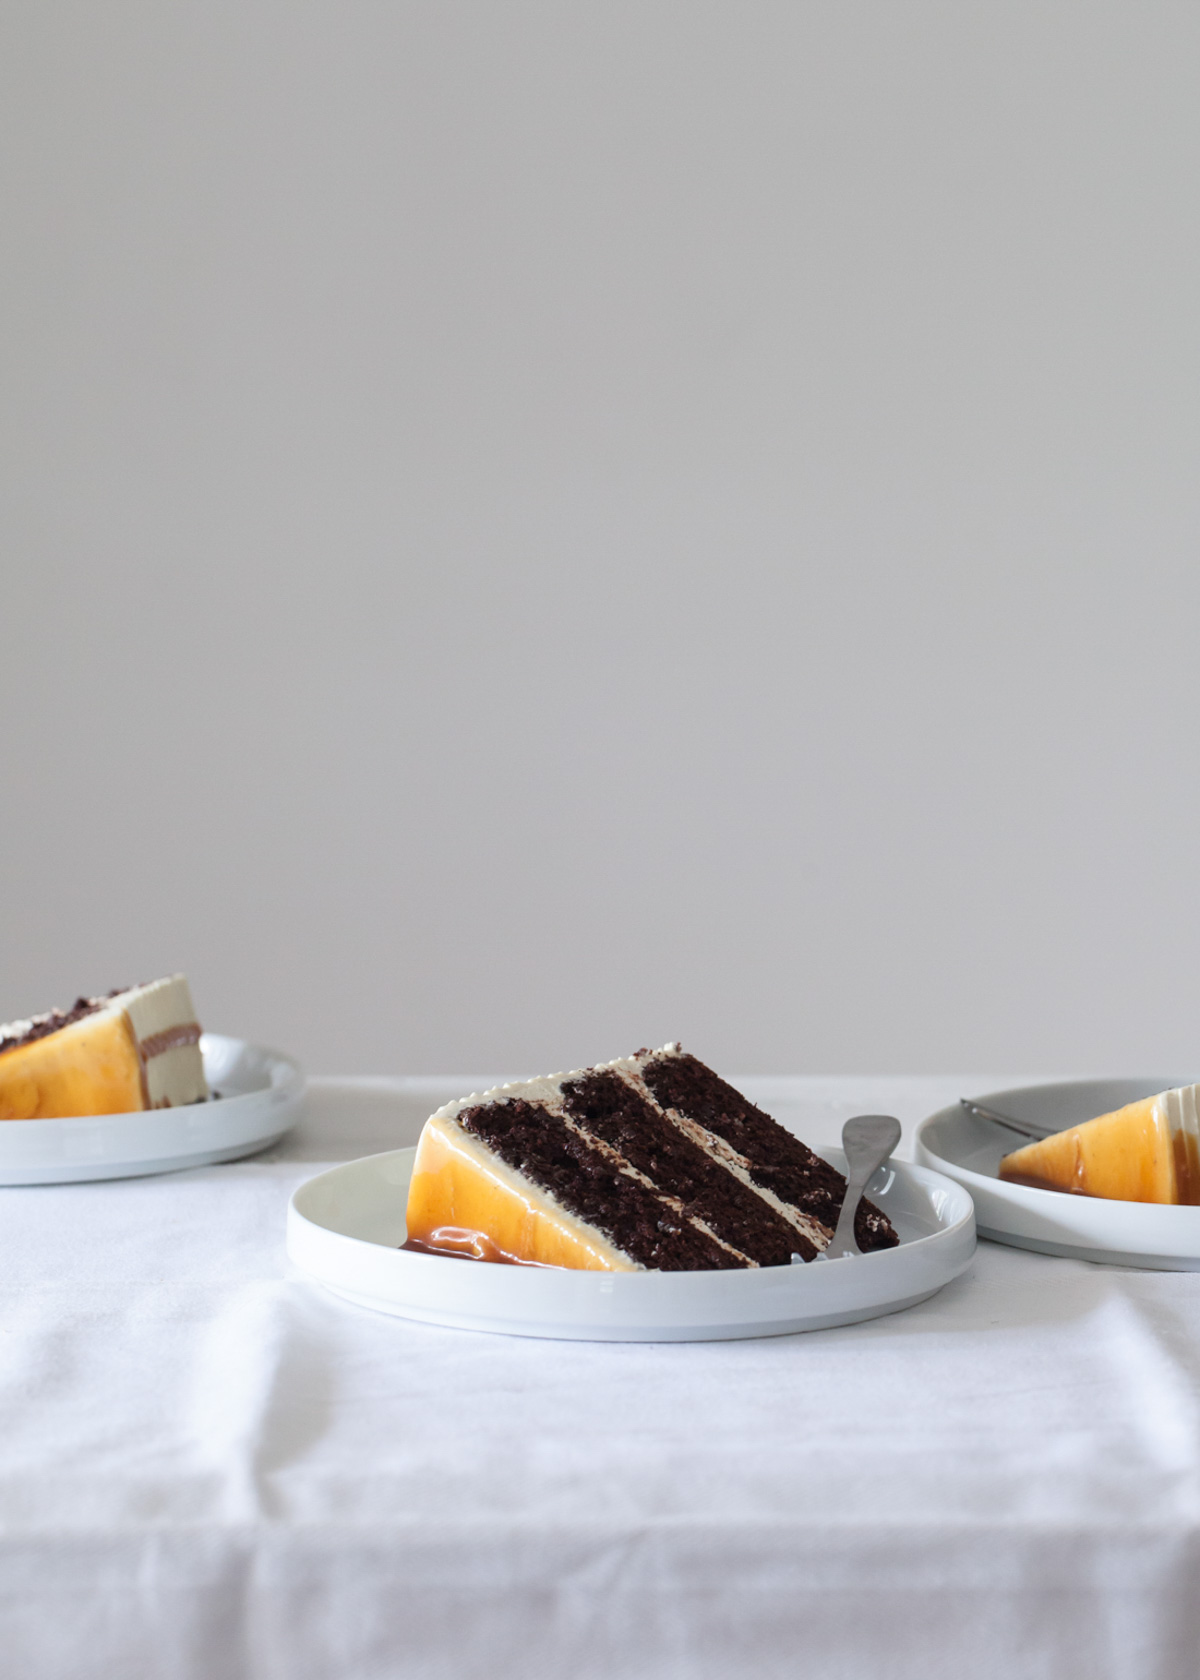 A slice of chocolate layer cake with caramel on the outside